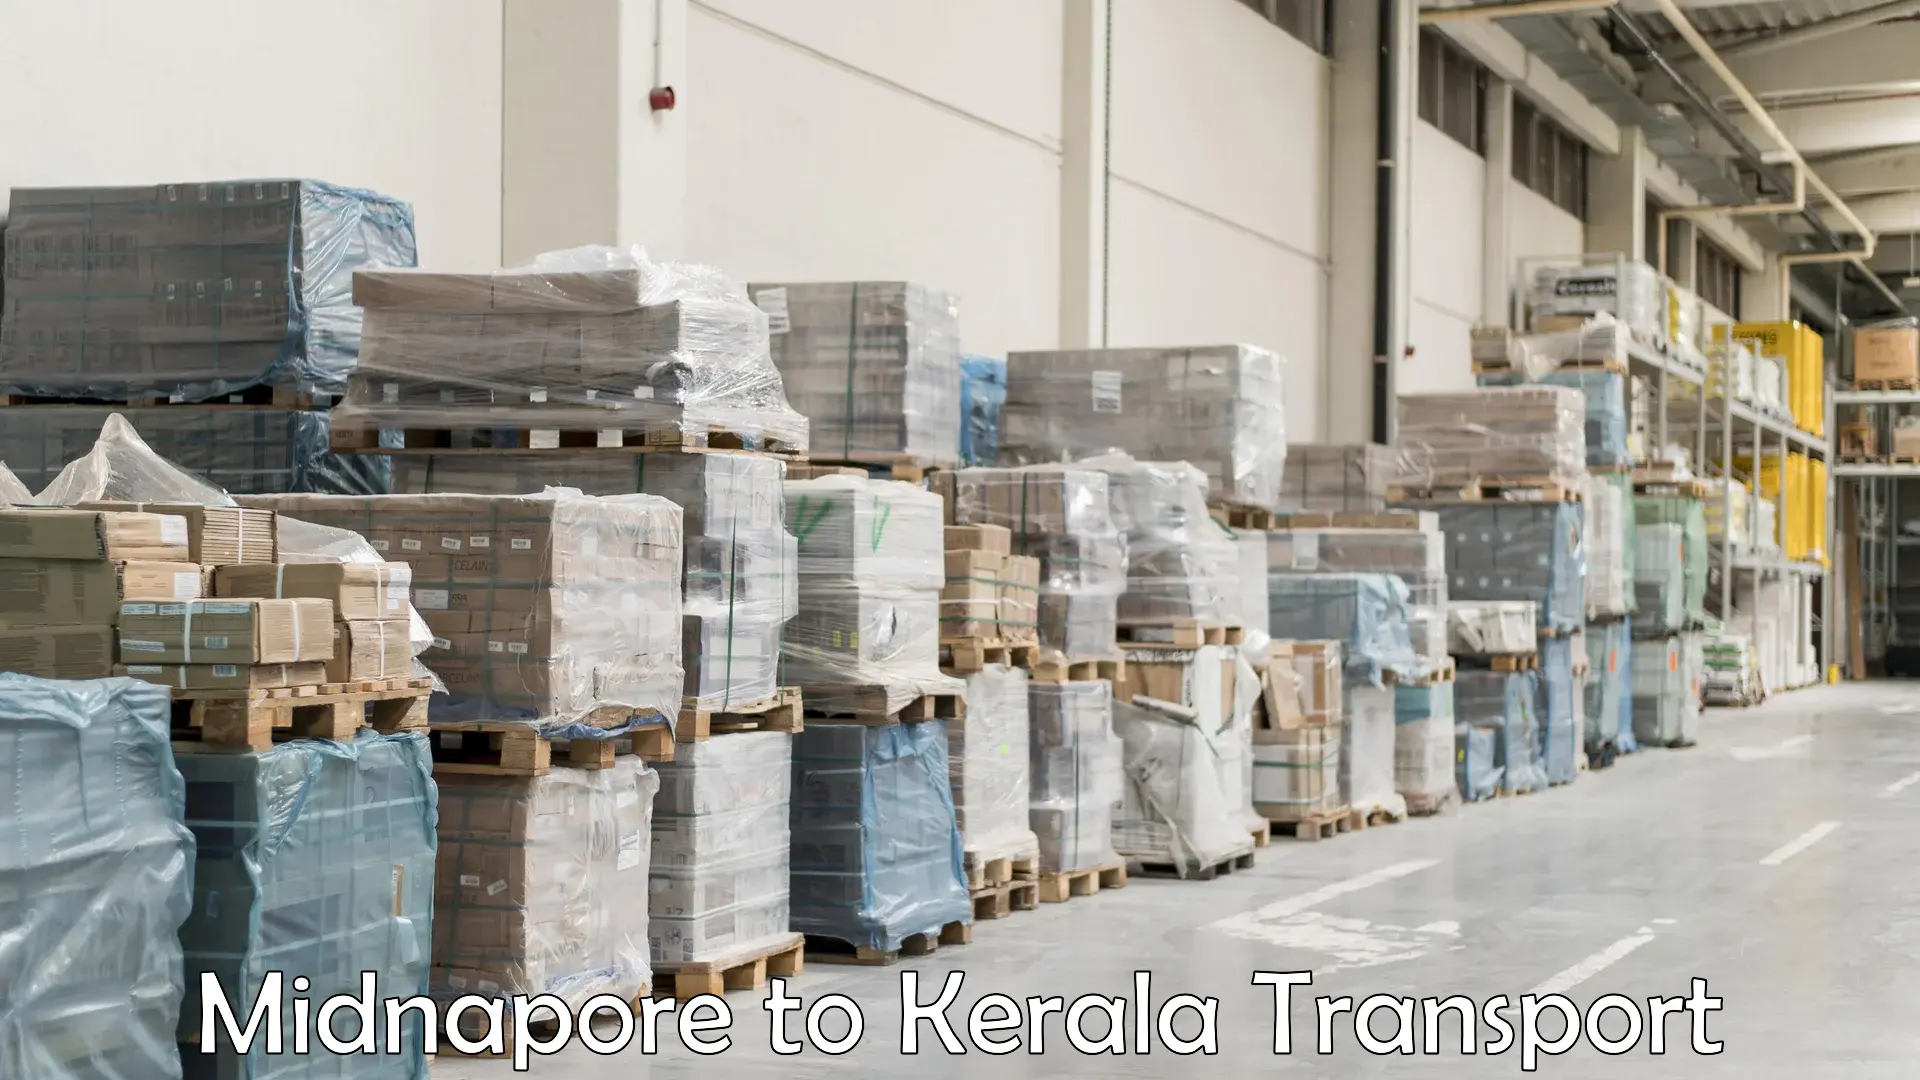 Nationwide transport services Midnapore to Kochi